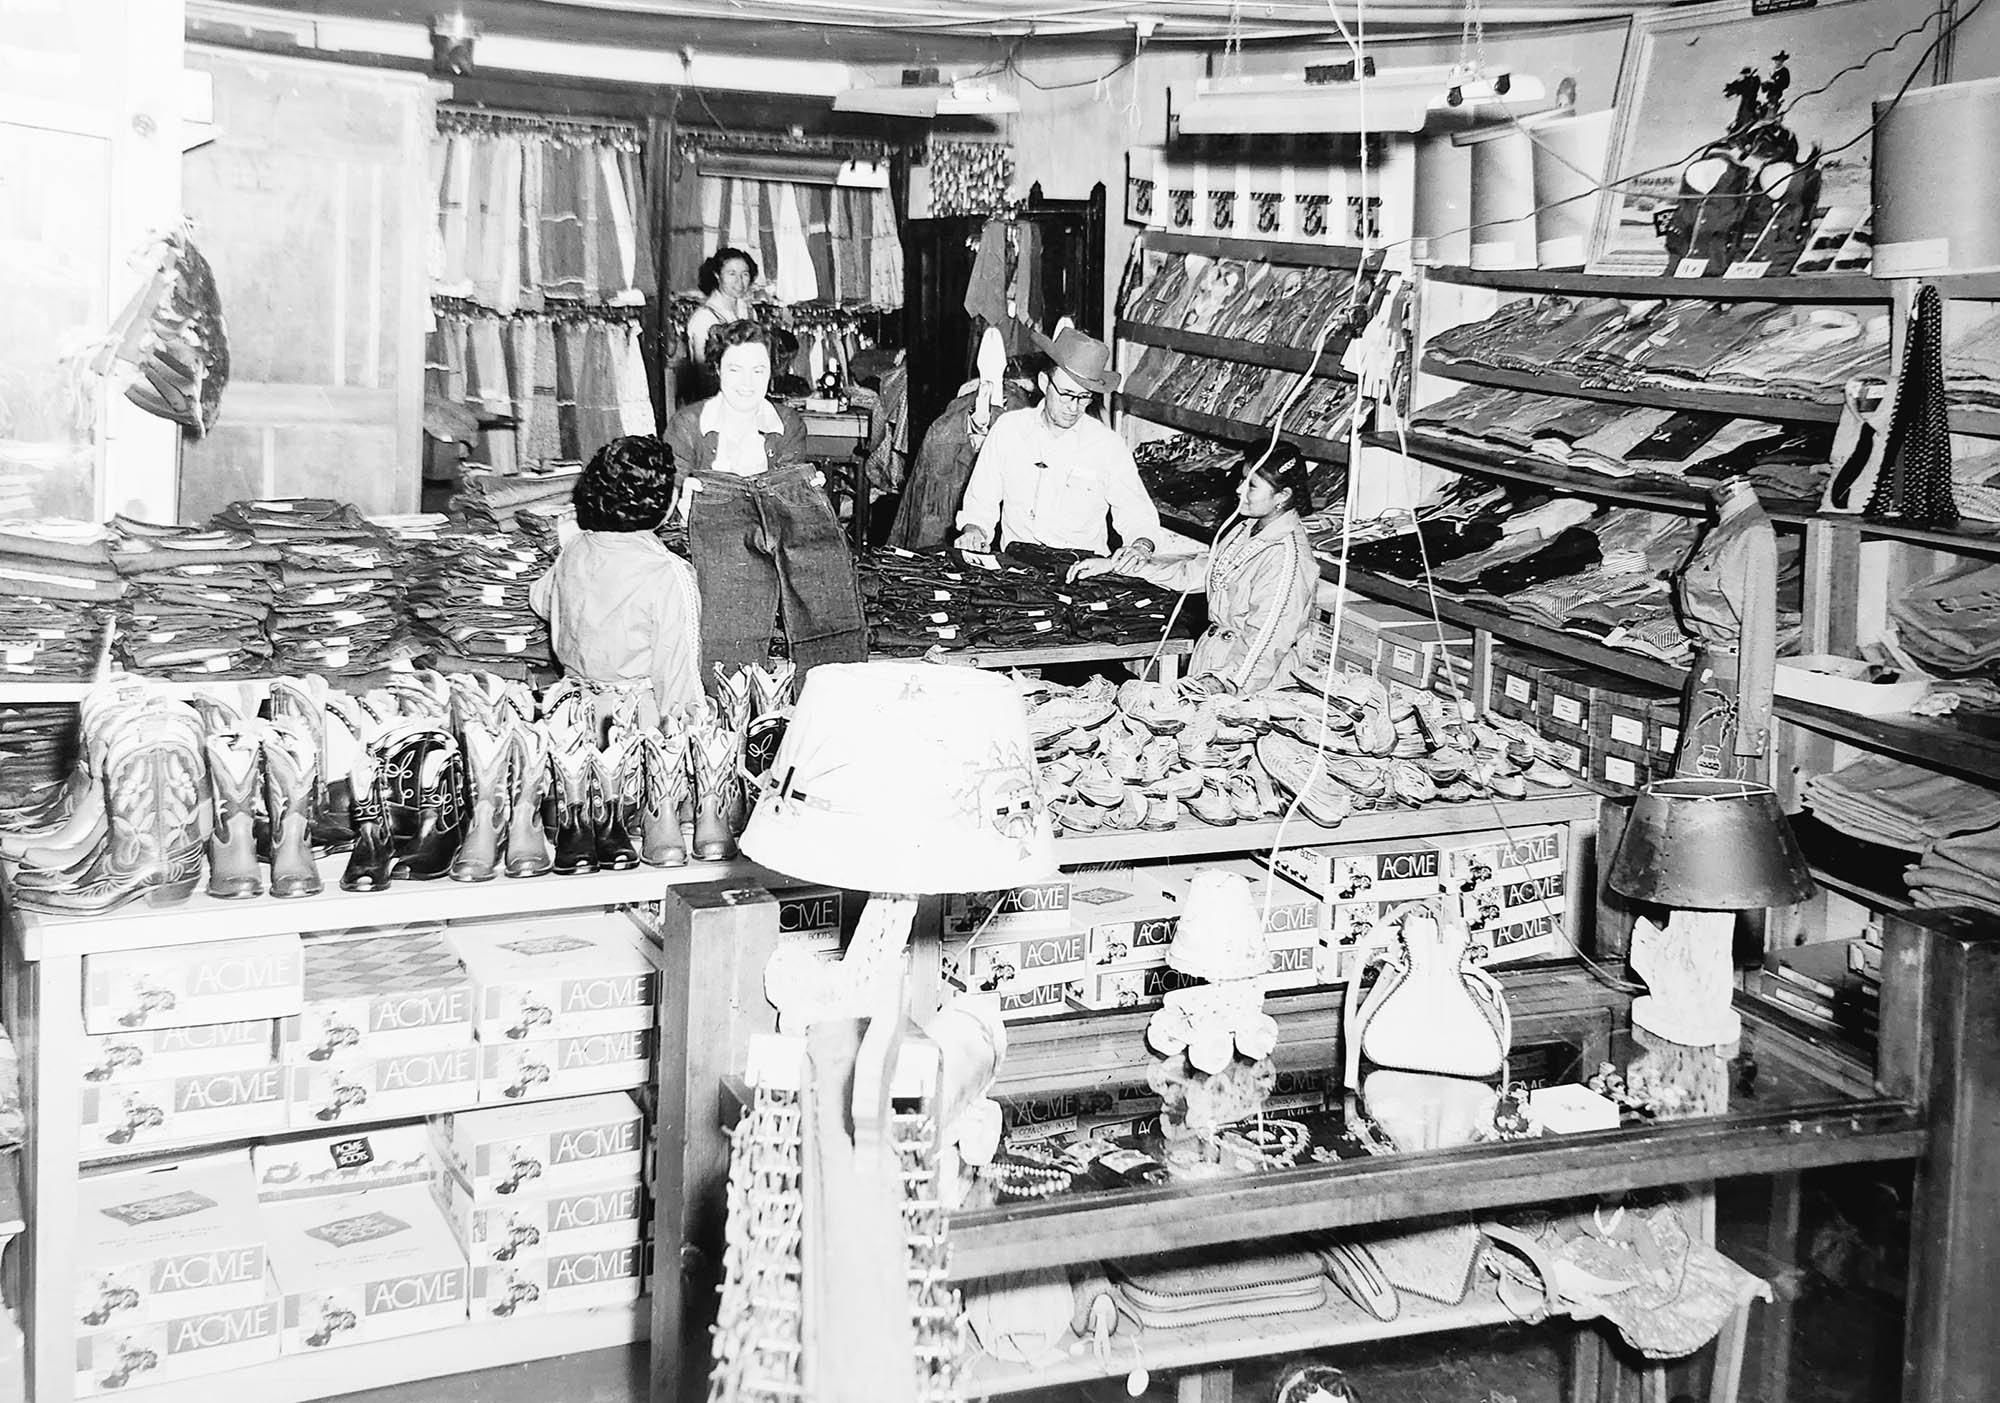 Customers in the Western Shop